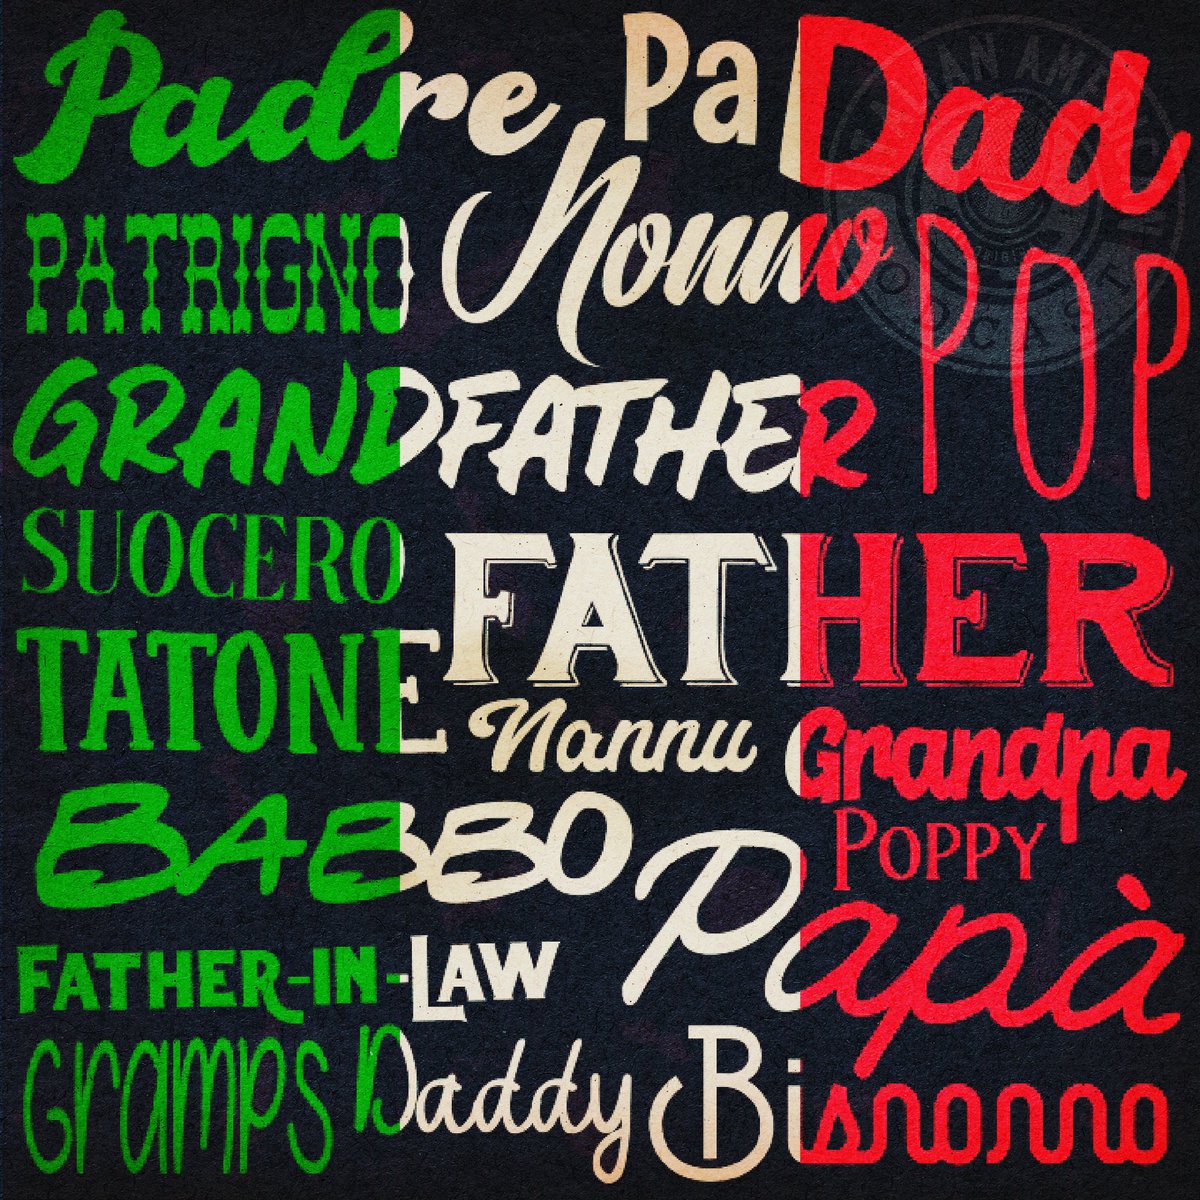 We’re wishing a #HappyFathersDay to every #Dad, #Papà, #Nonno, #Italian Father-in-Law, and special man in your life!  
The gentle strength of an #ItalianDad is their ability to teach us by word and deed... so let’s celebrate these special men who have made us who we are!